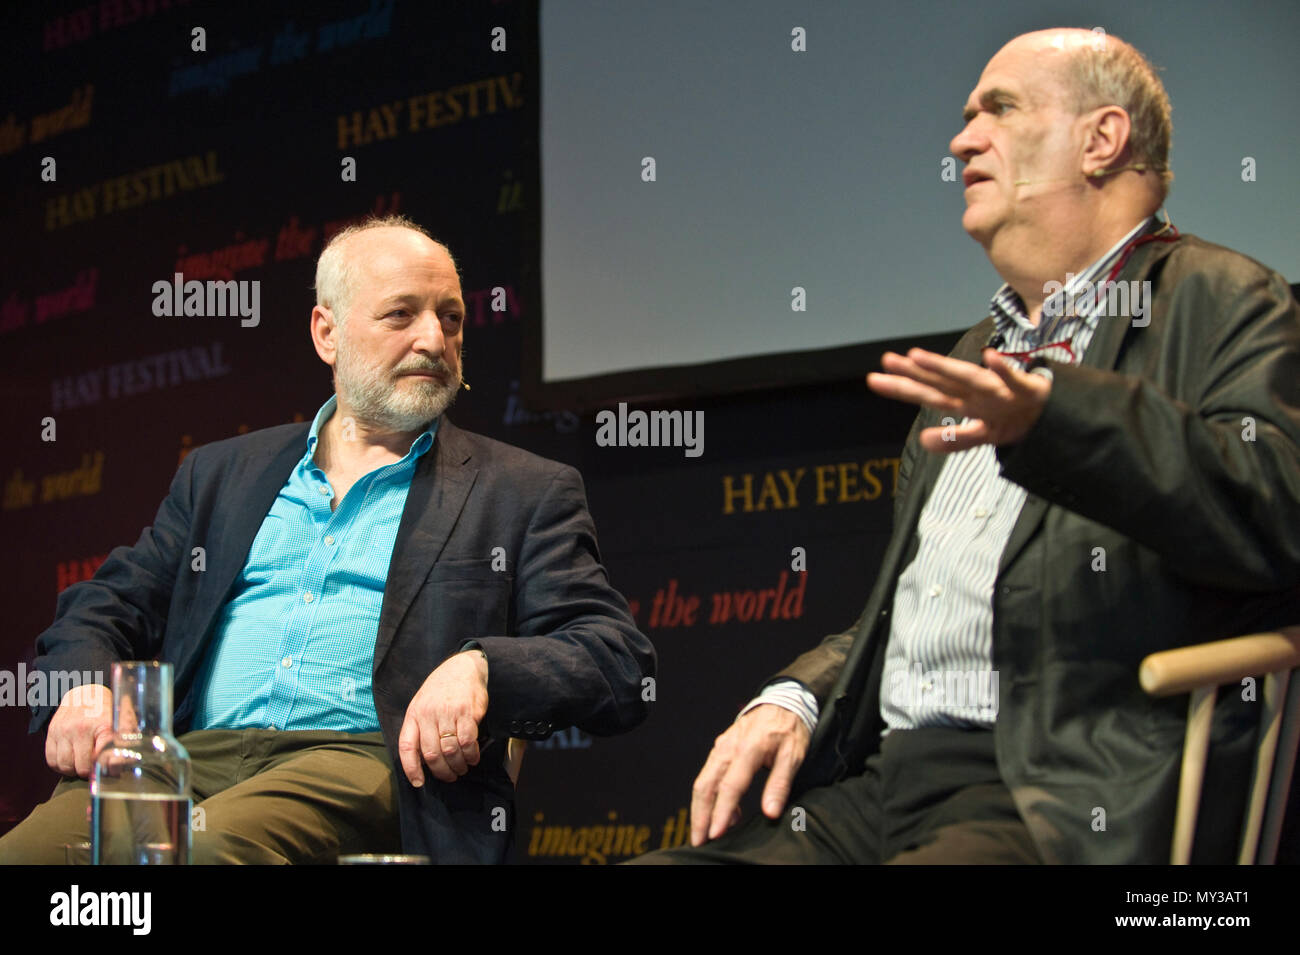 Andre Aciman & Colm Toibin speaking on stage at Hay Festival 2018 Hay-on-Wye Powys Wales UK Stock Photo